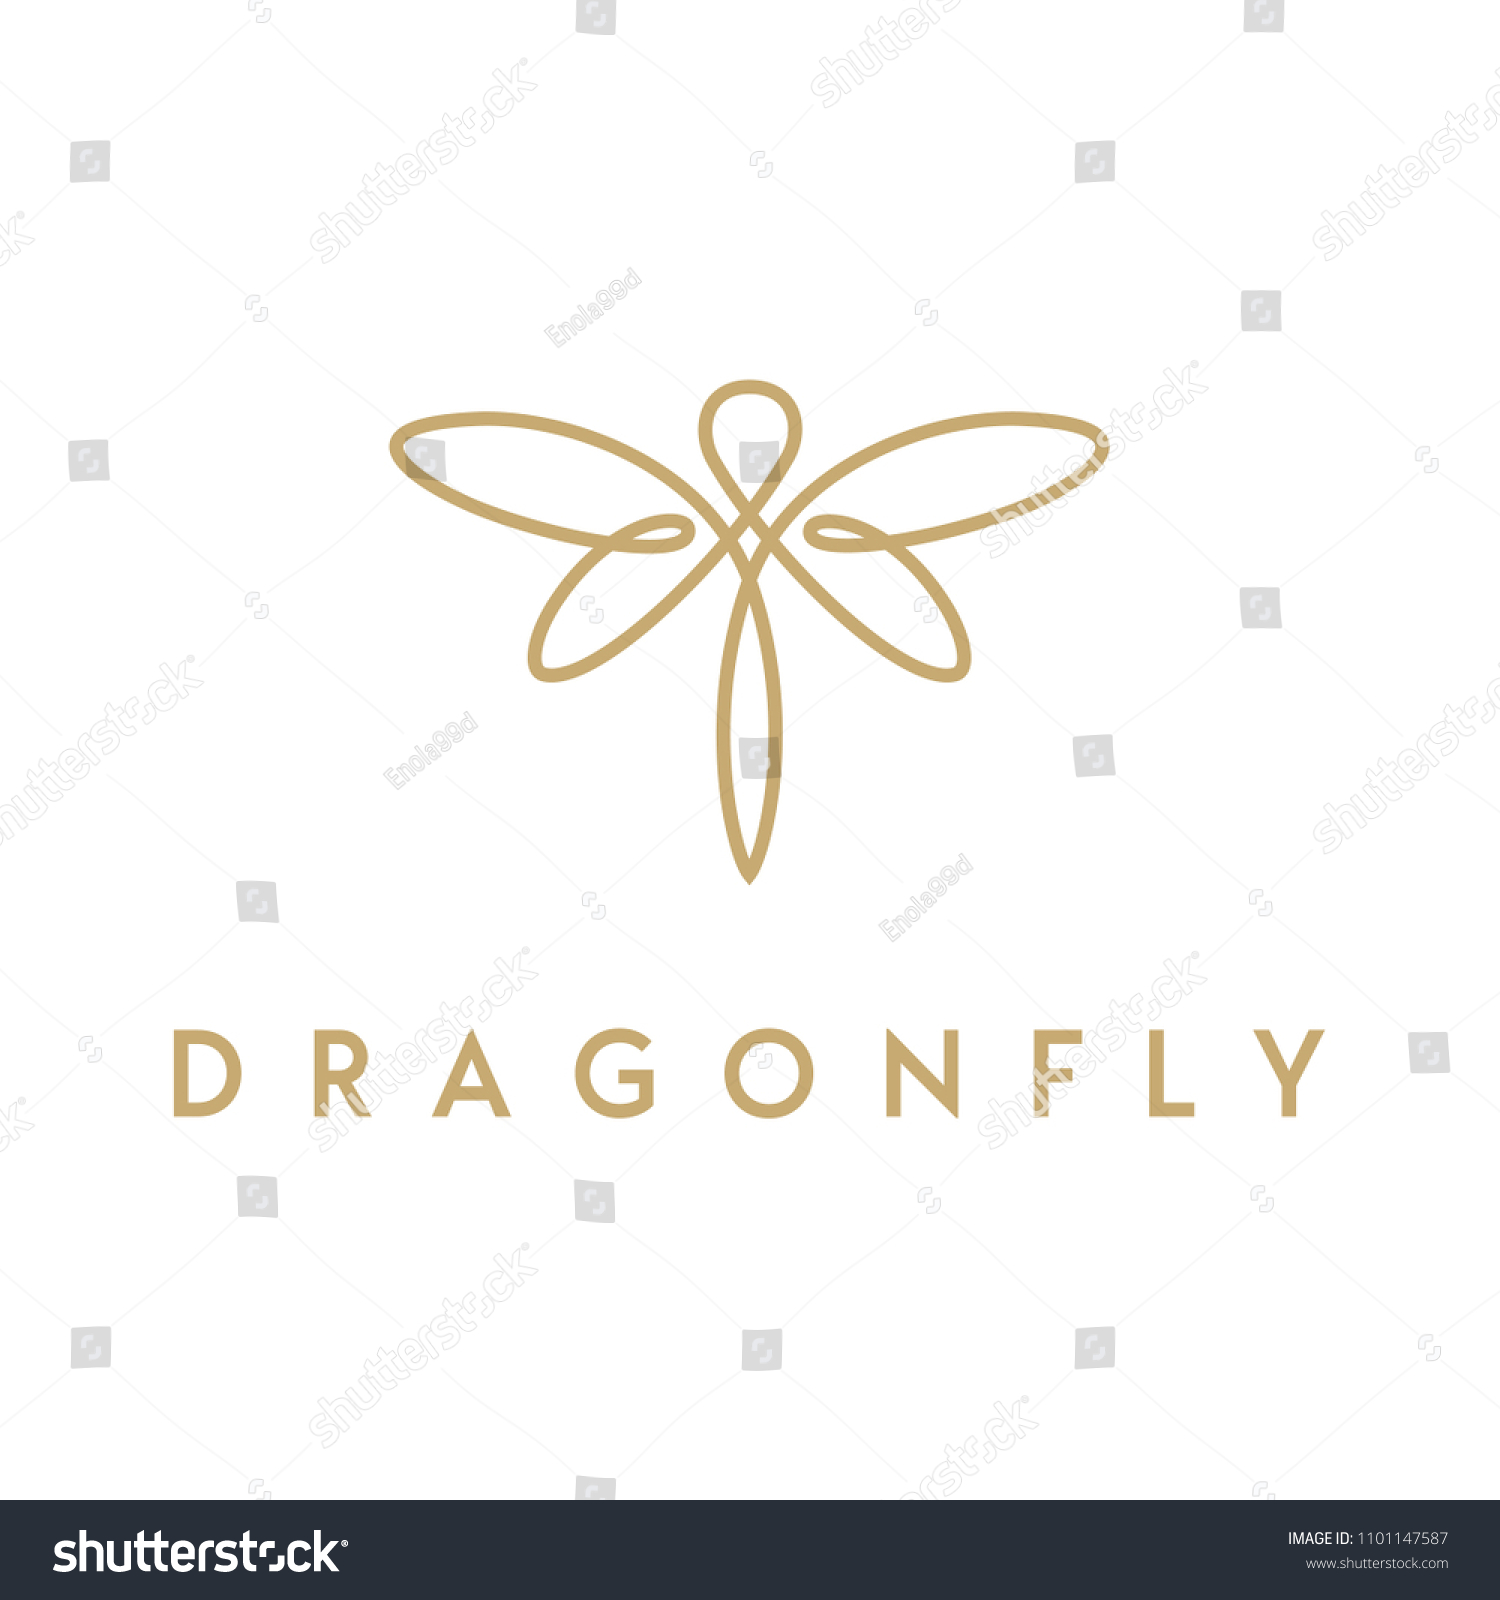 Golden Dragonfly wings, Butterfly Insect Fly Minimalist elegant Doodle line art style logo #1101147587